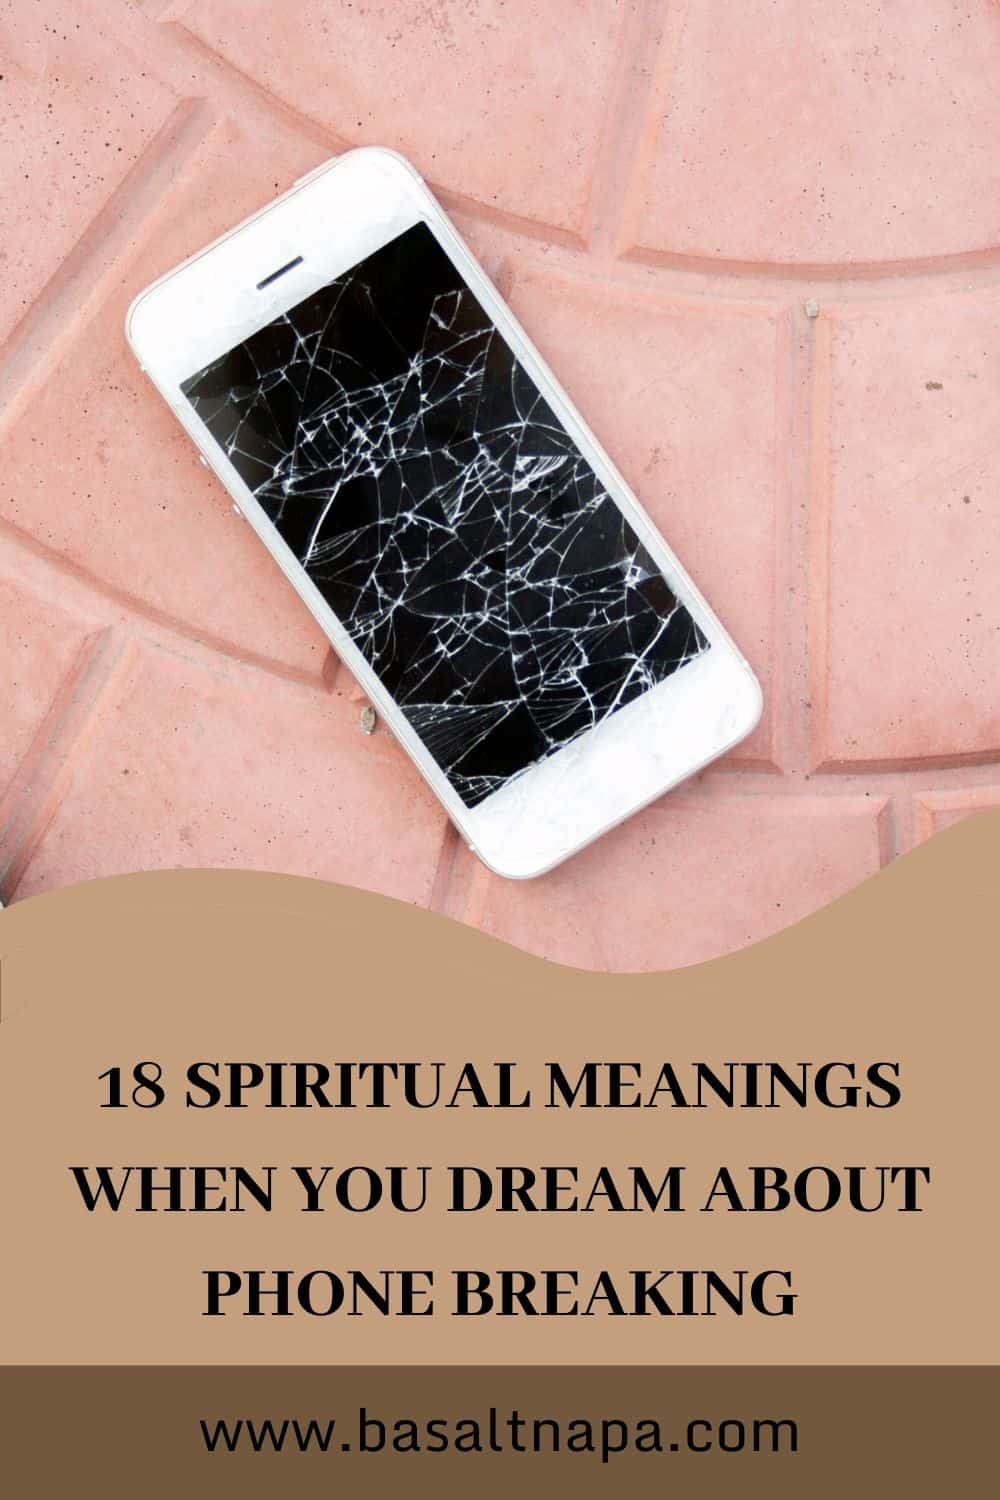 18 Spiritual Meanings When You Dream About Phone Breaking